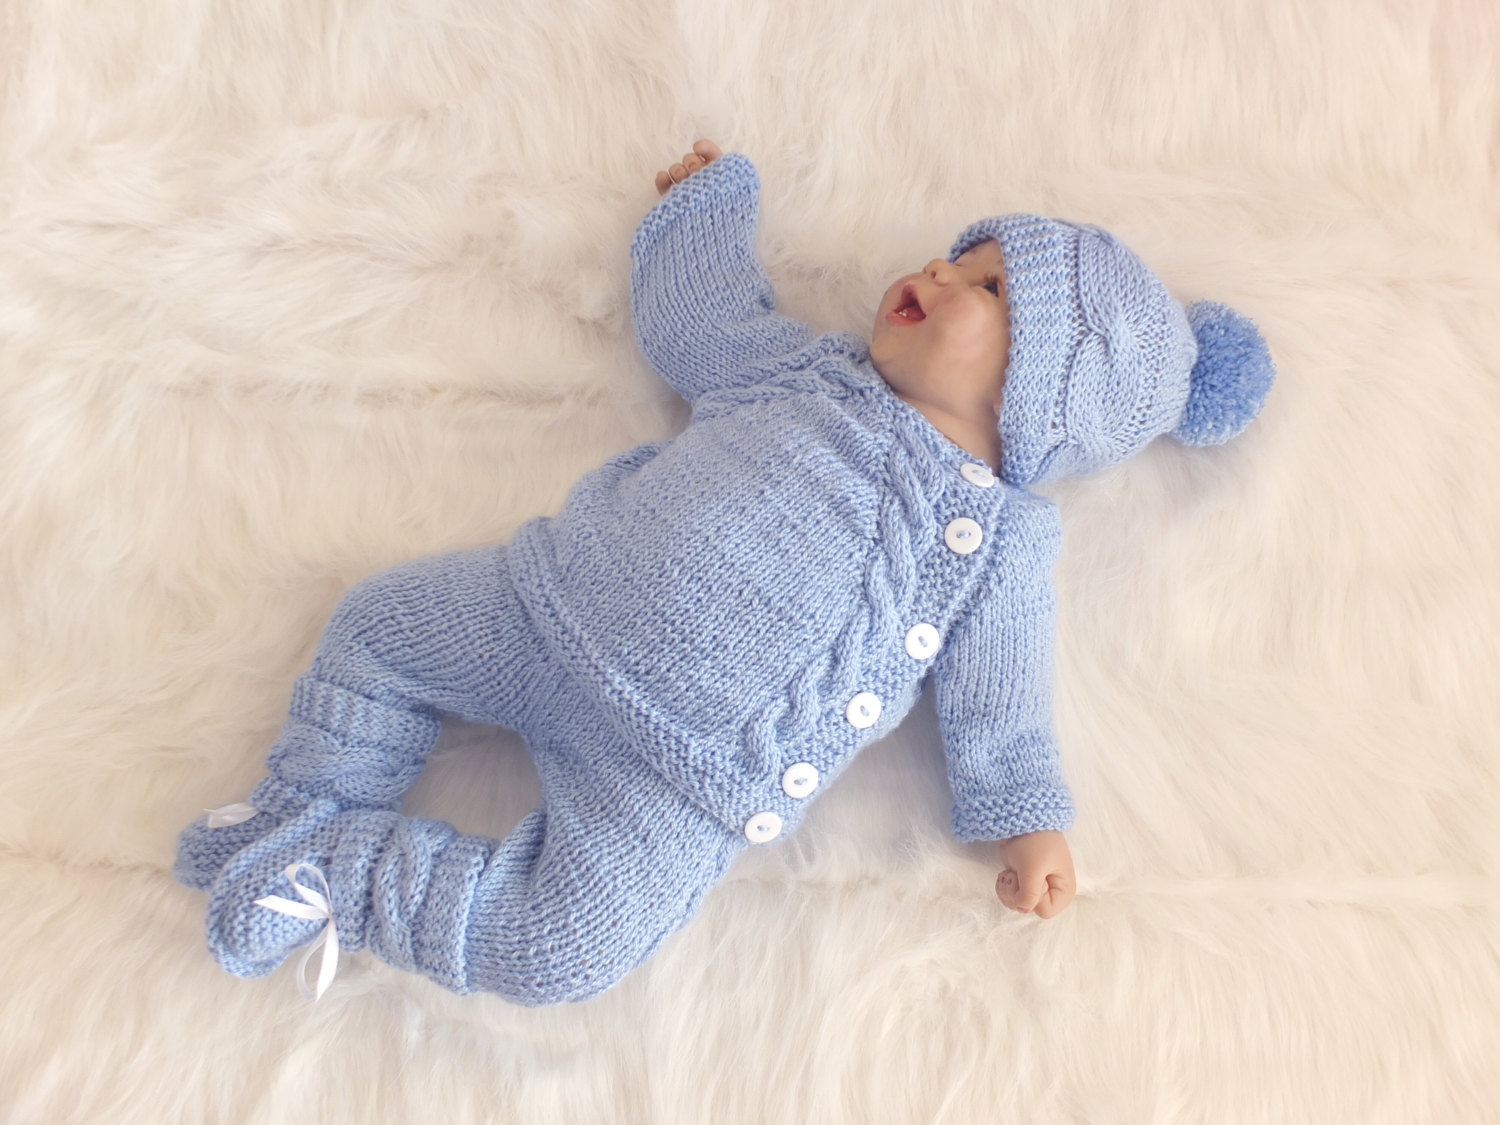 knitted baby clothes handmade by inese eusgmxk